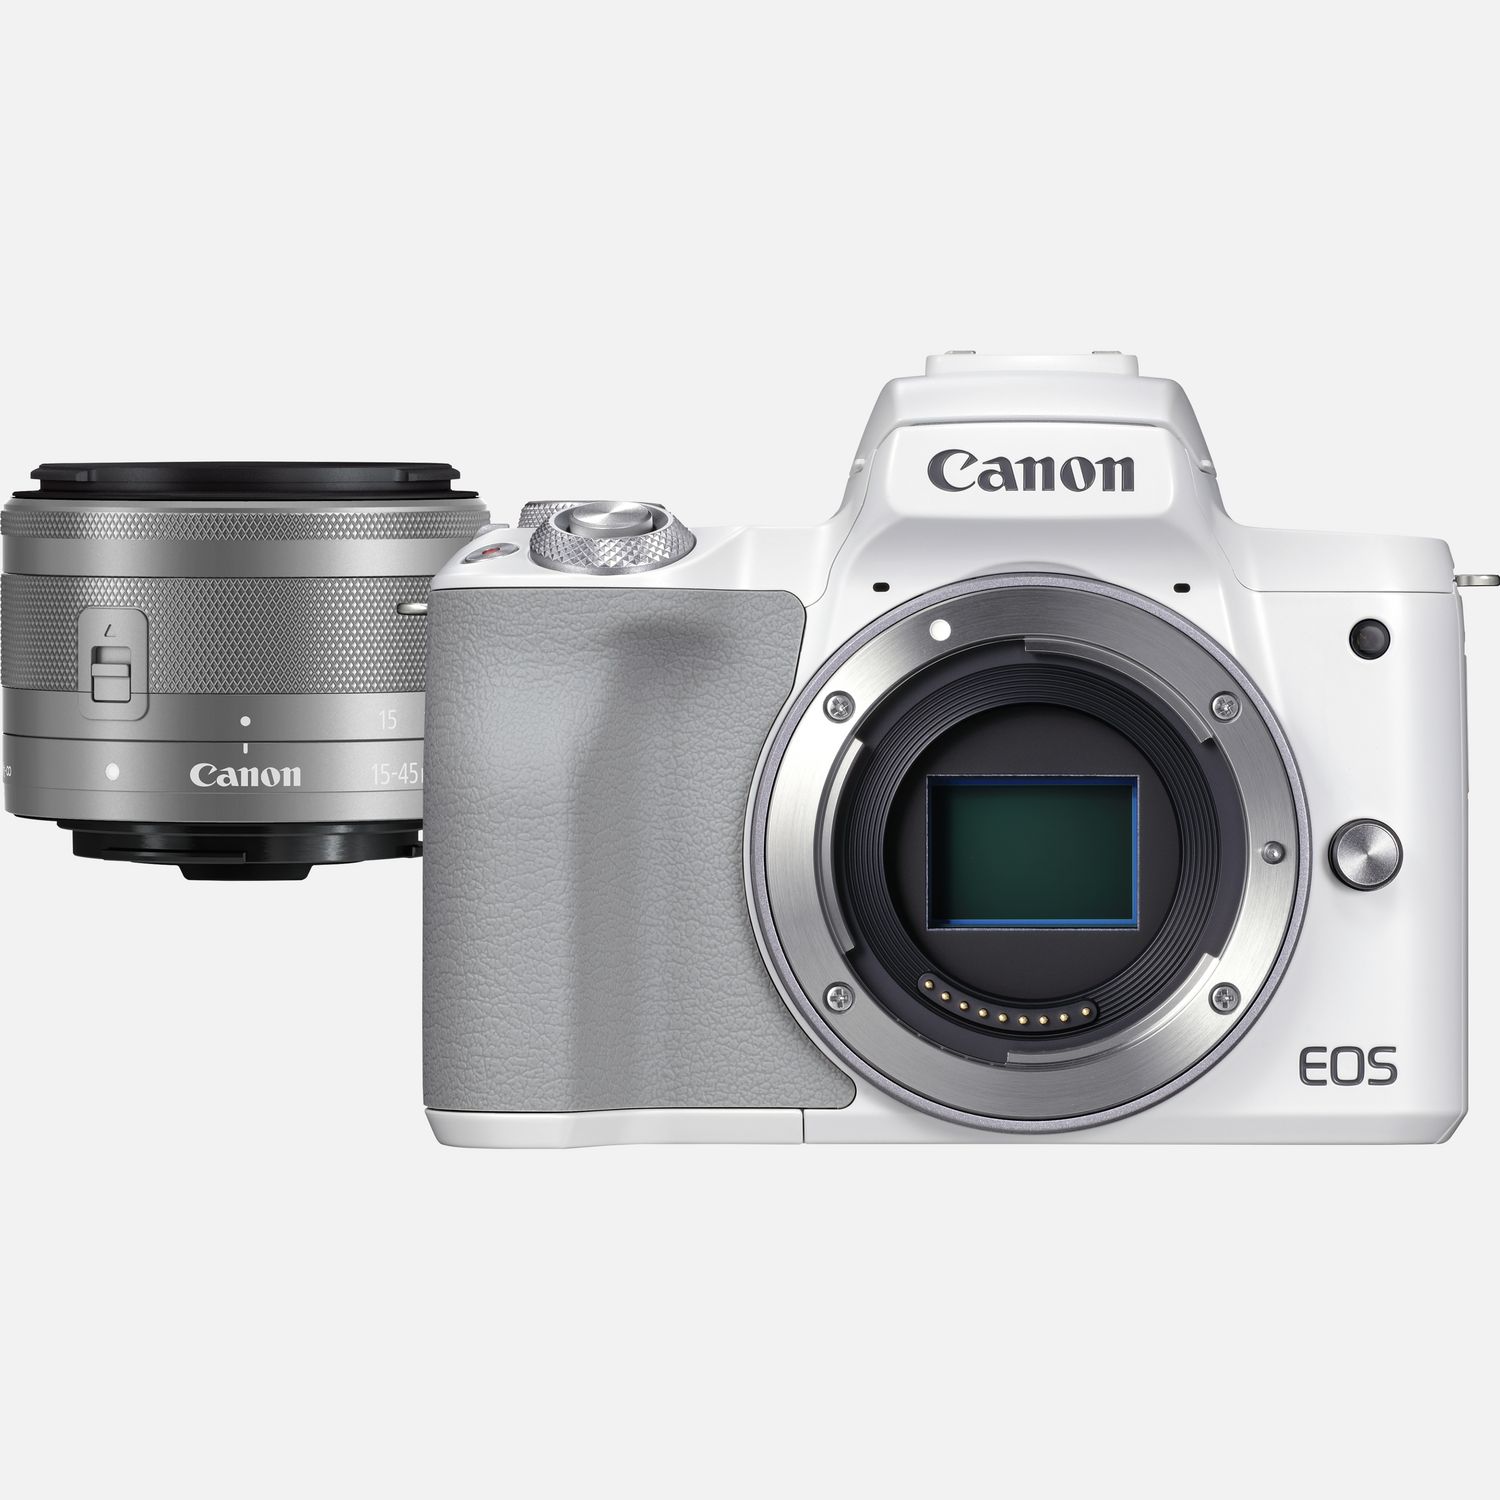 Buy Canon EOS M50 Mark II Mirrorless Camera, White + EF-M 15-45mm f/3.5-6.3 IS STM Lens, Silver